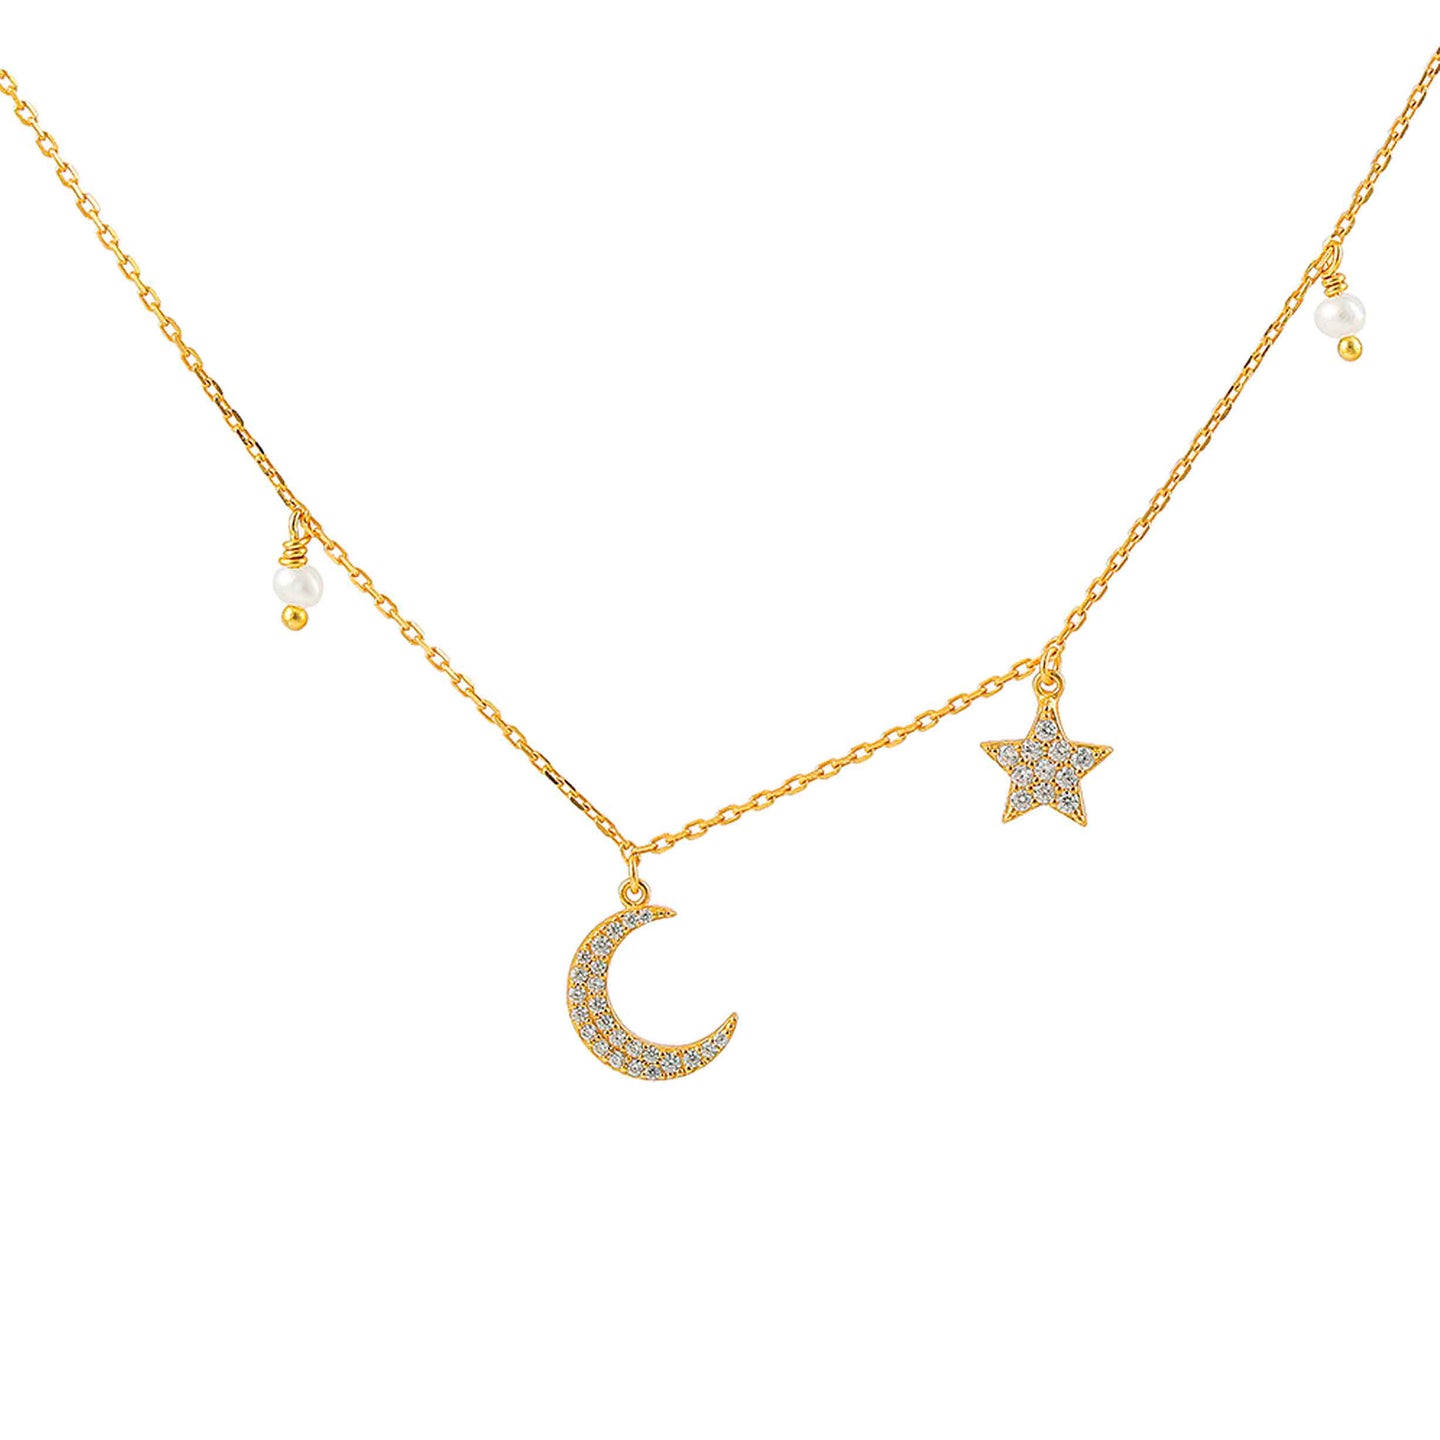 Golden Cosmo necklace – Gold